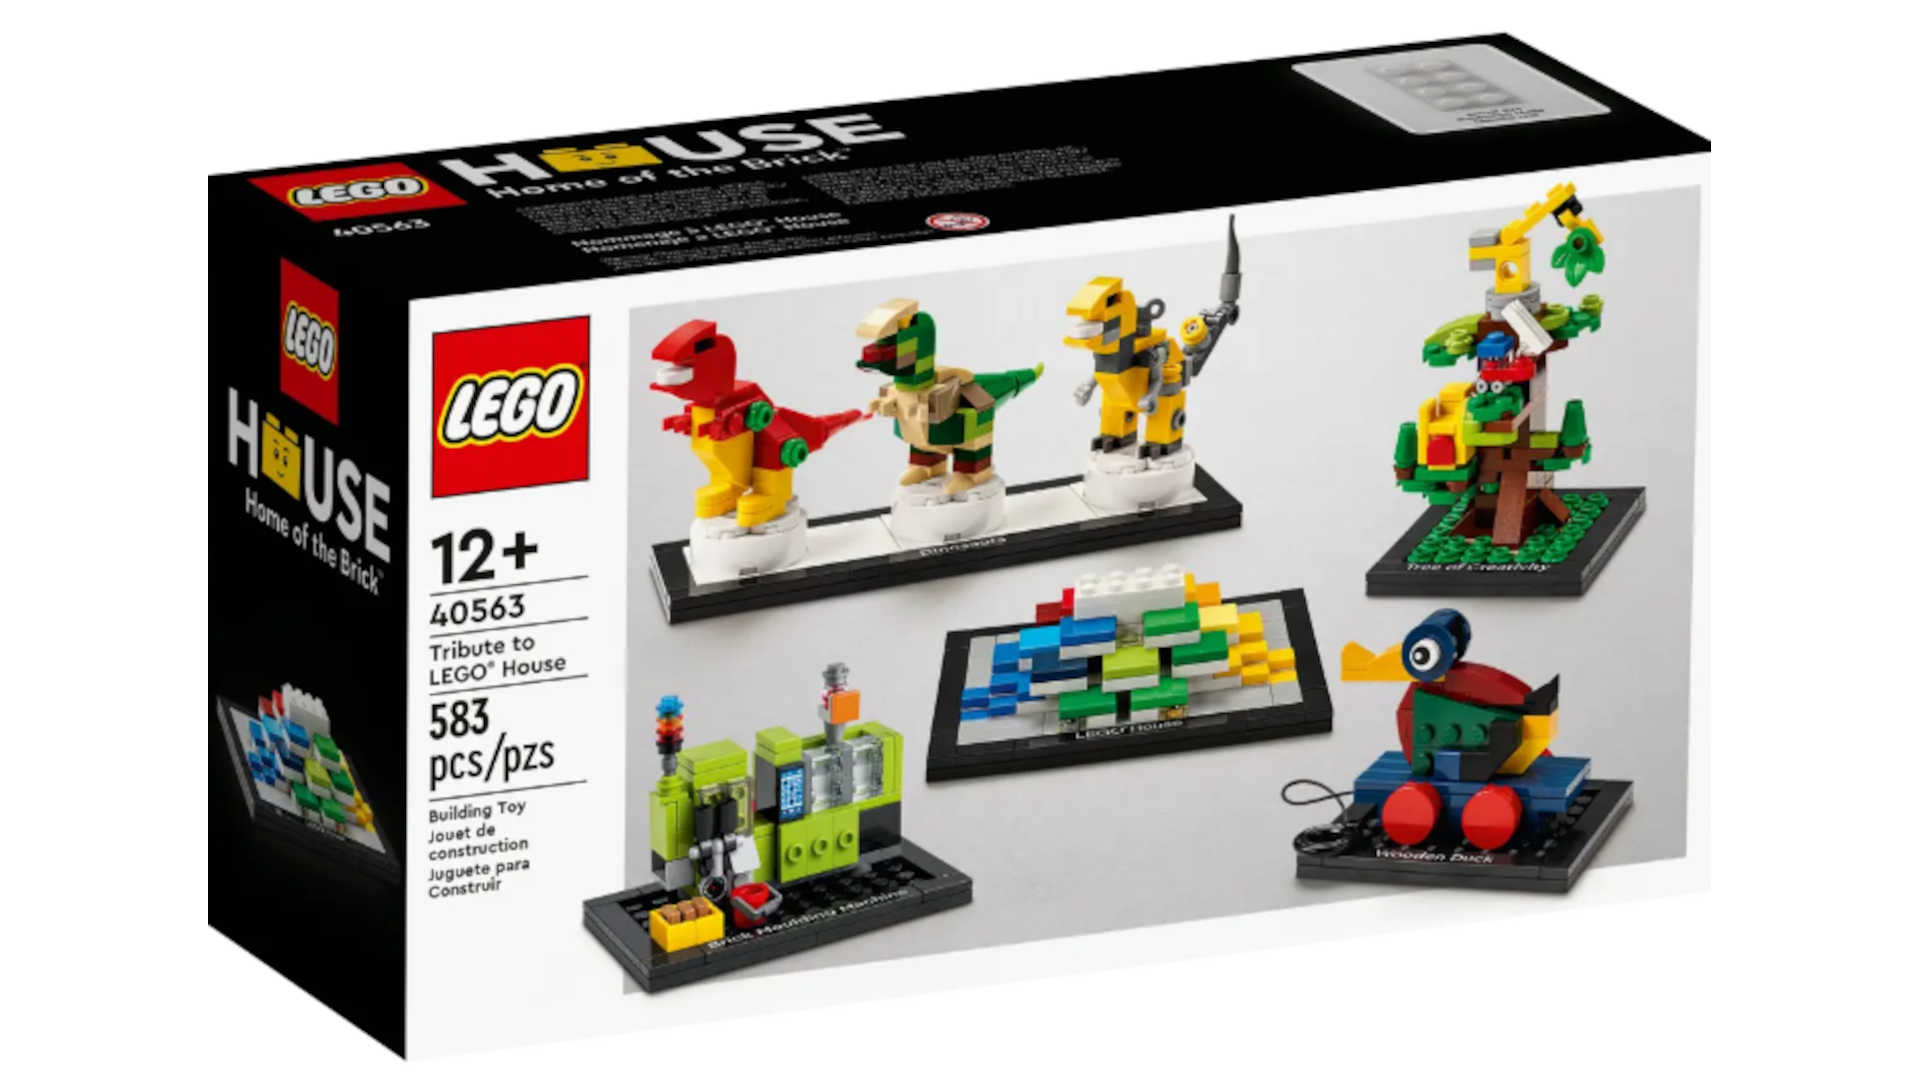 A LEGO box shows the Tribute to LEGO House set.